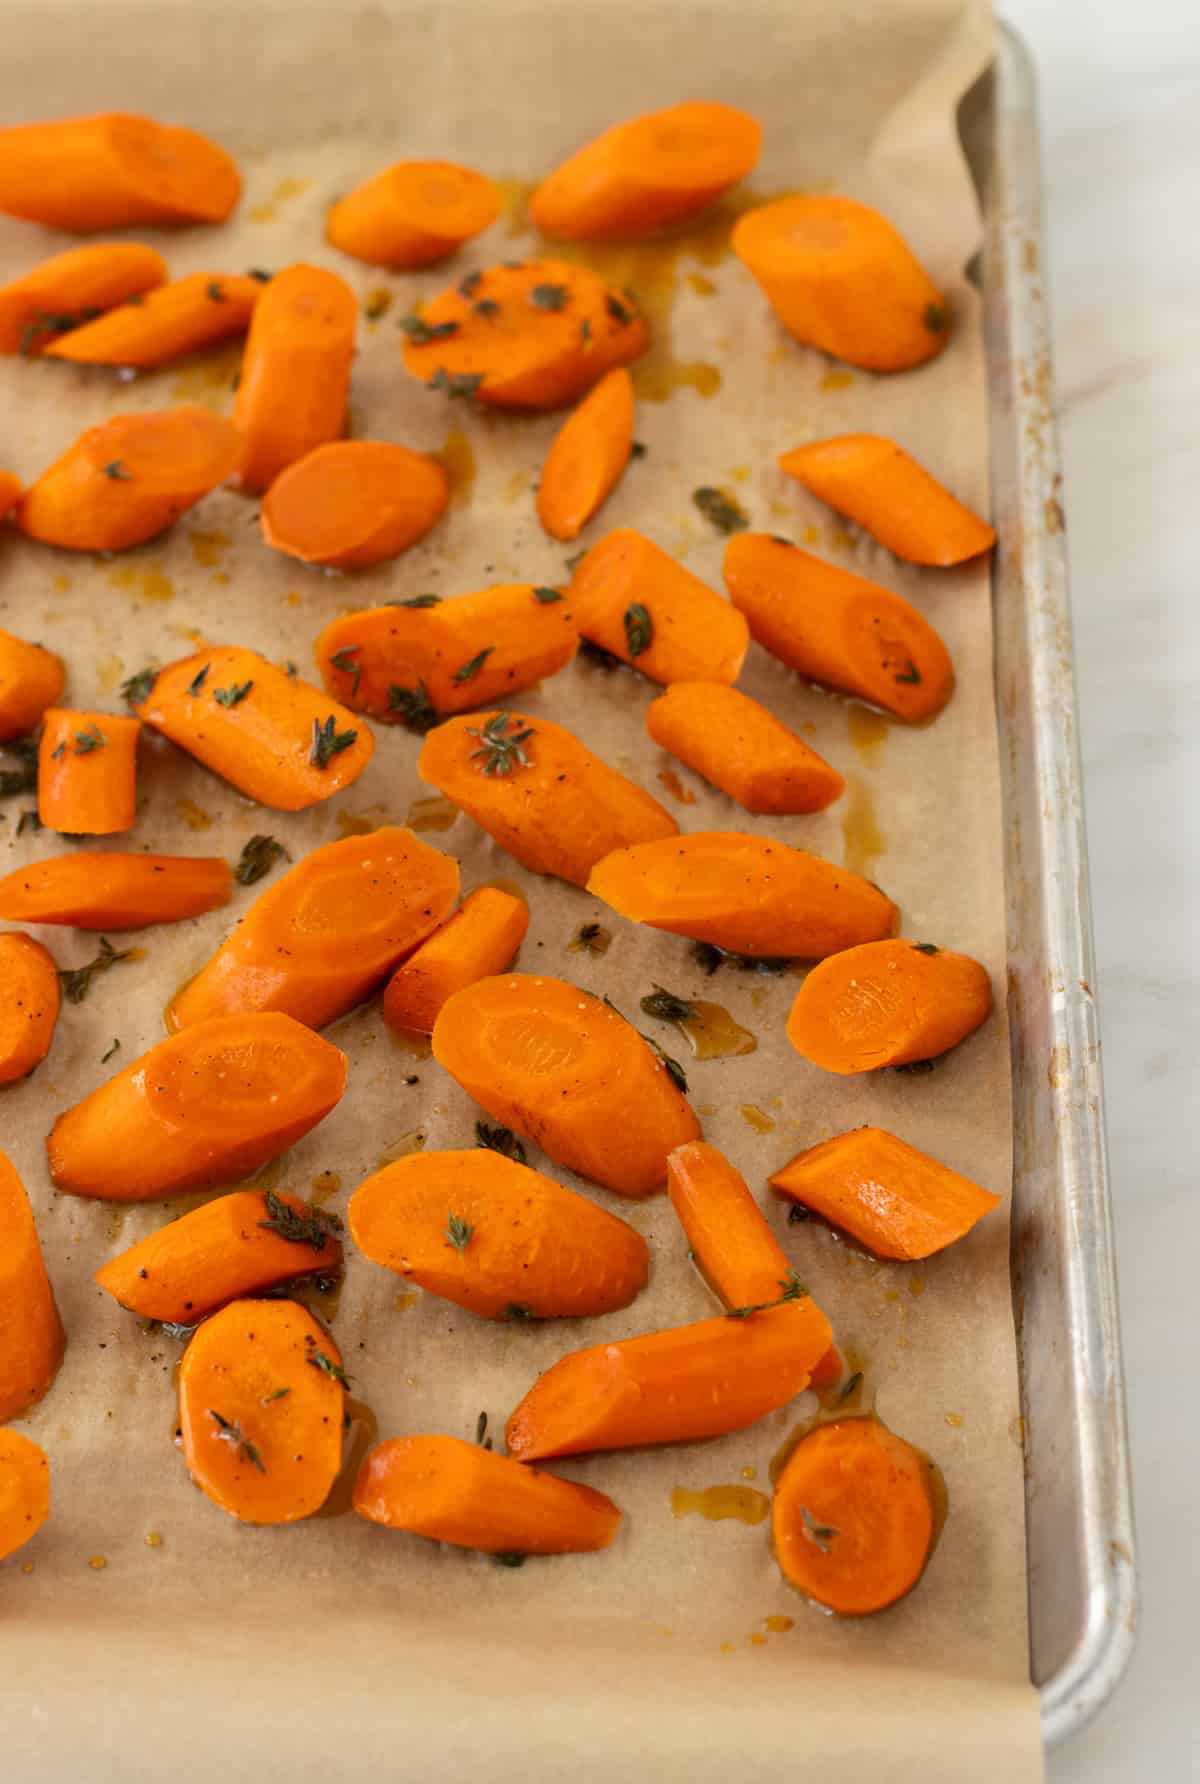 Carrots slices in a honey thyme sauce on a parchment lined baking sheet.